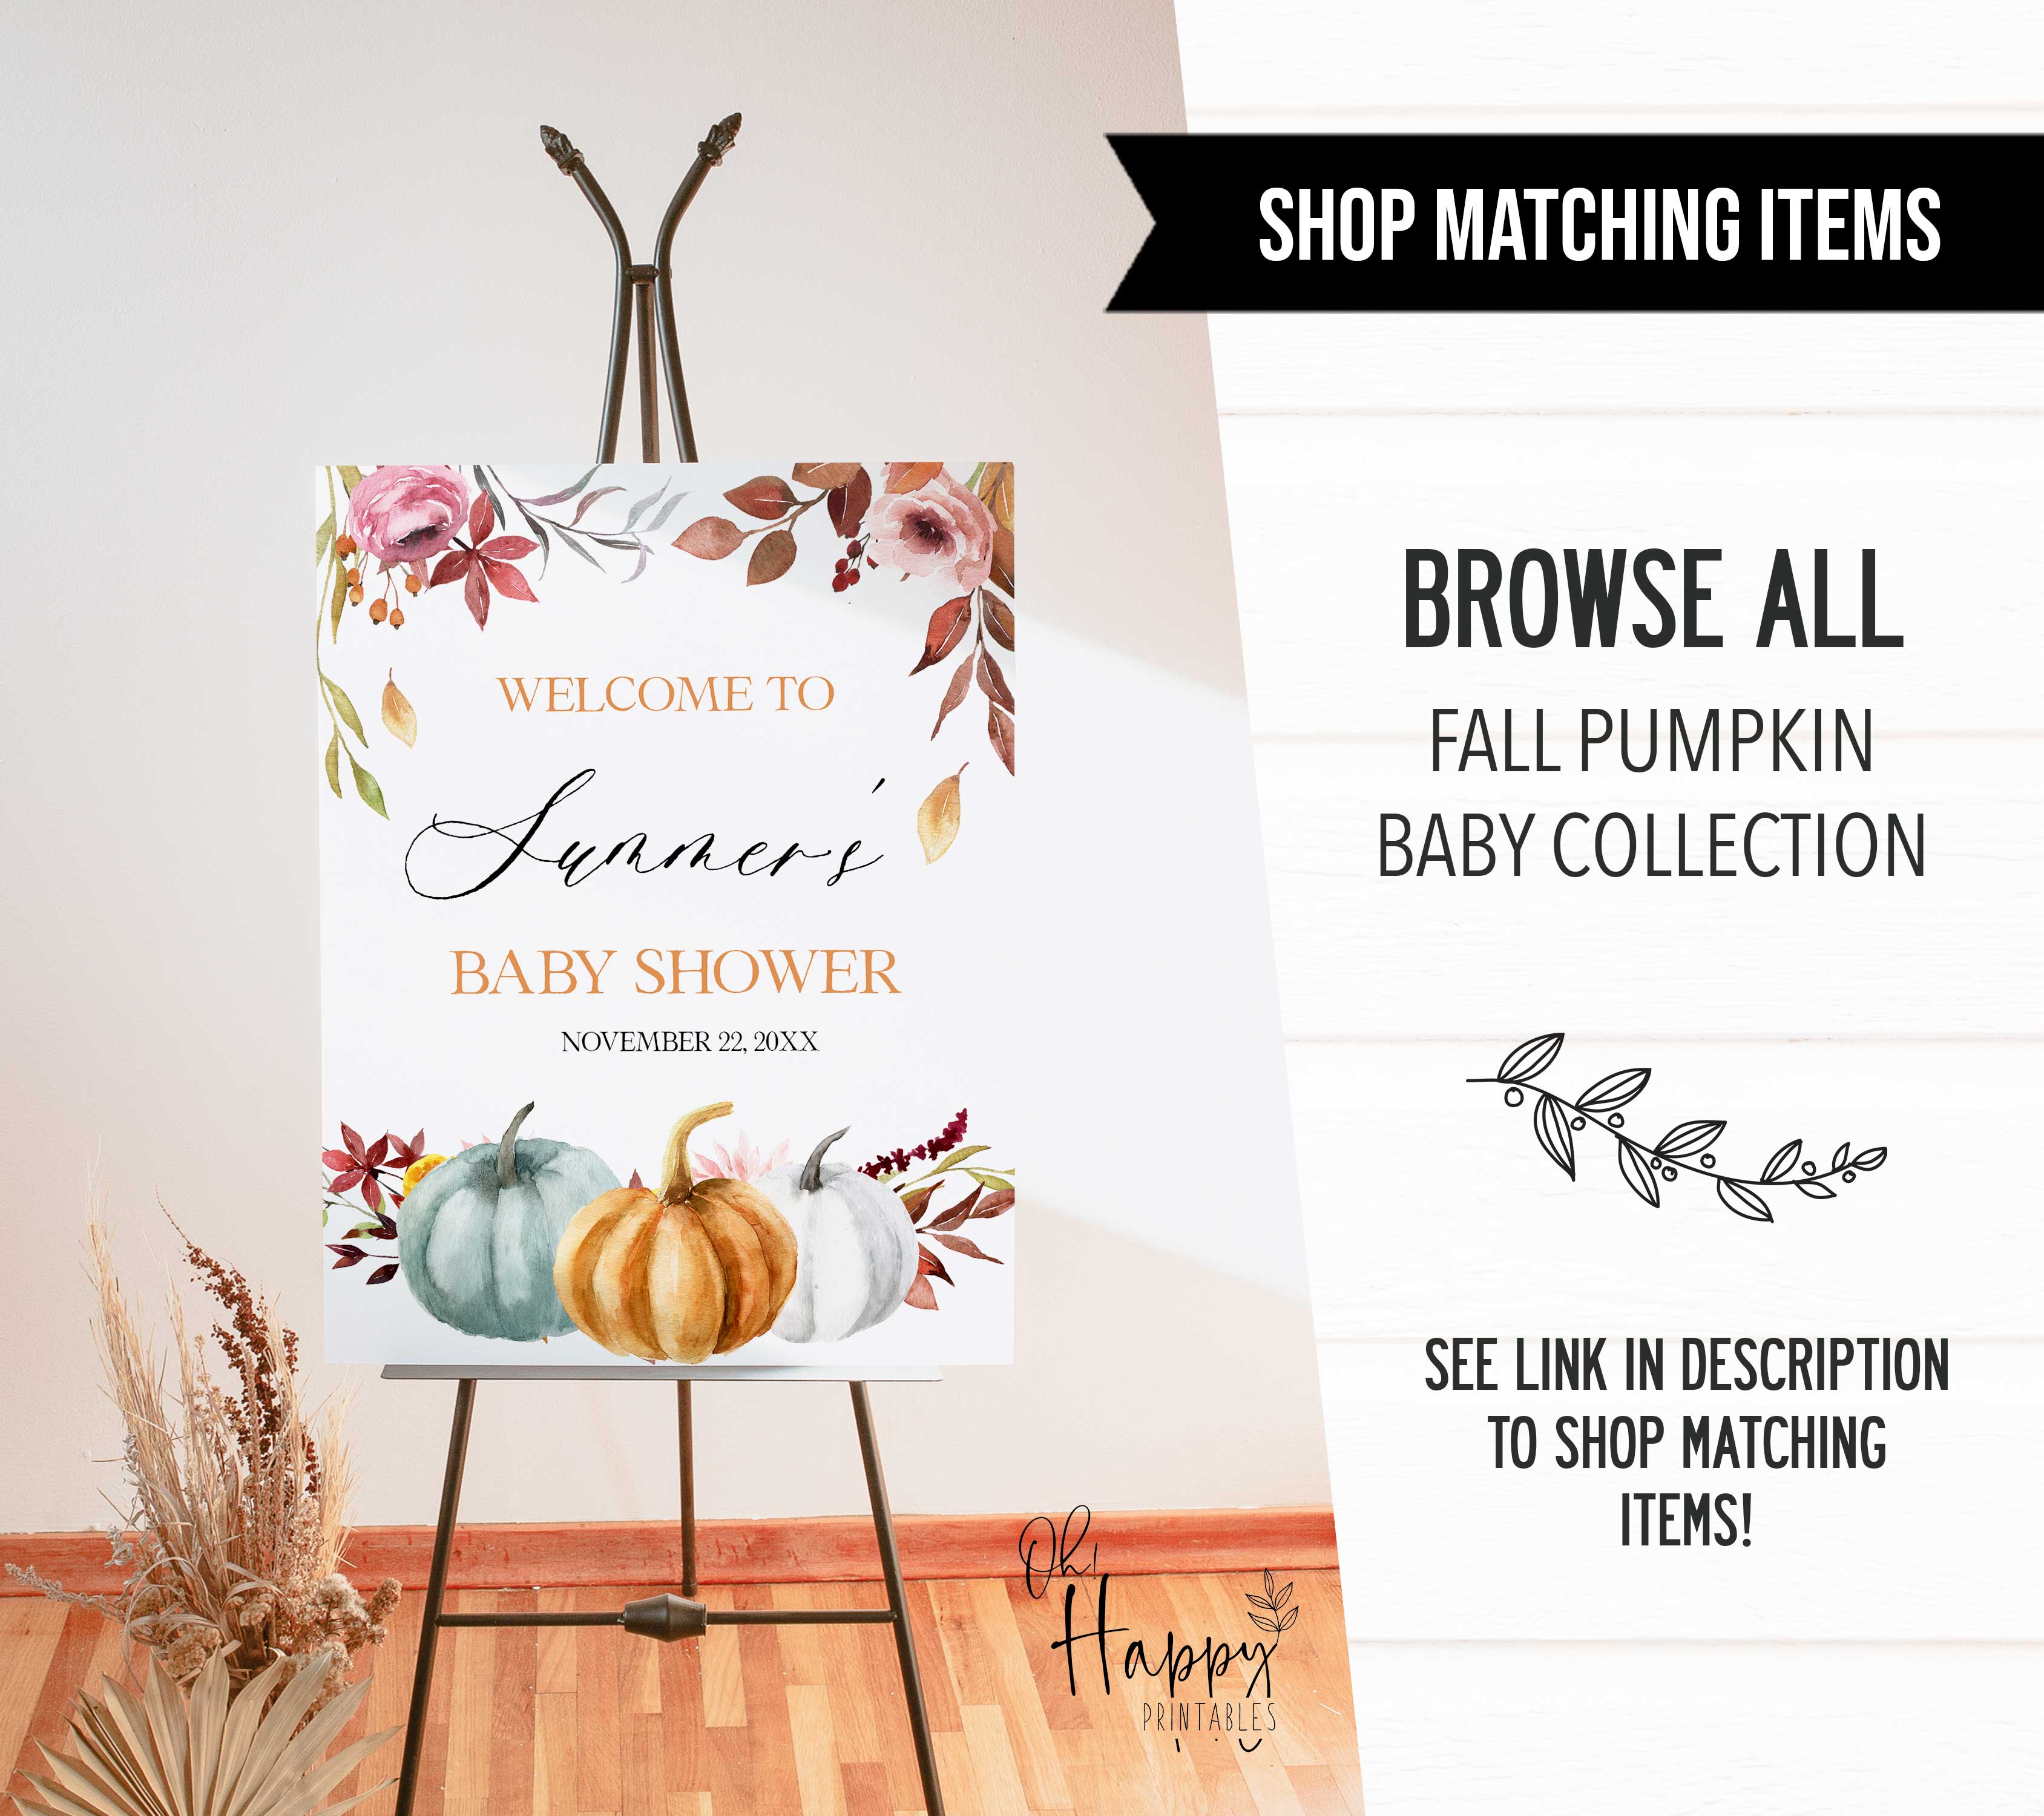 Fully editable baby shower little pumpkin invitation with a fall pumpkin design. Perfect for a Fall Pumpkin baby shower themed party